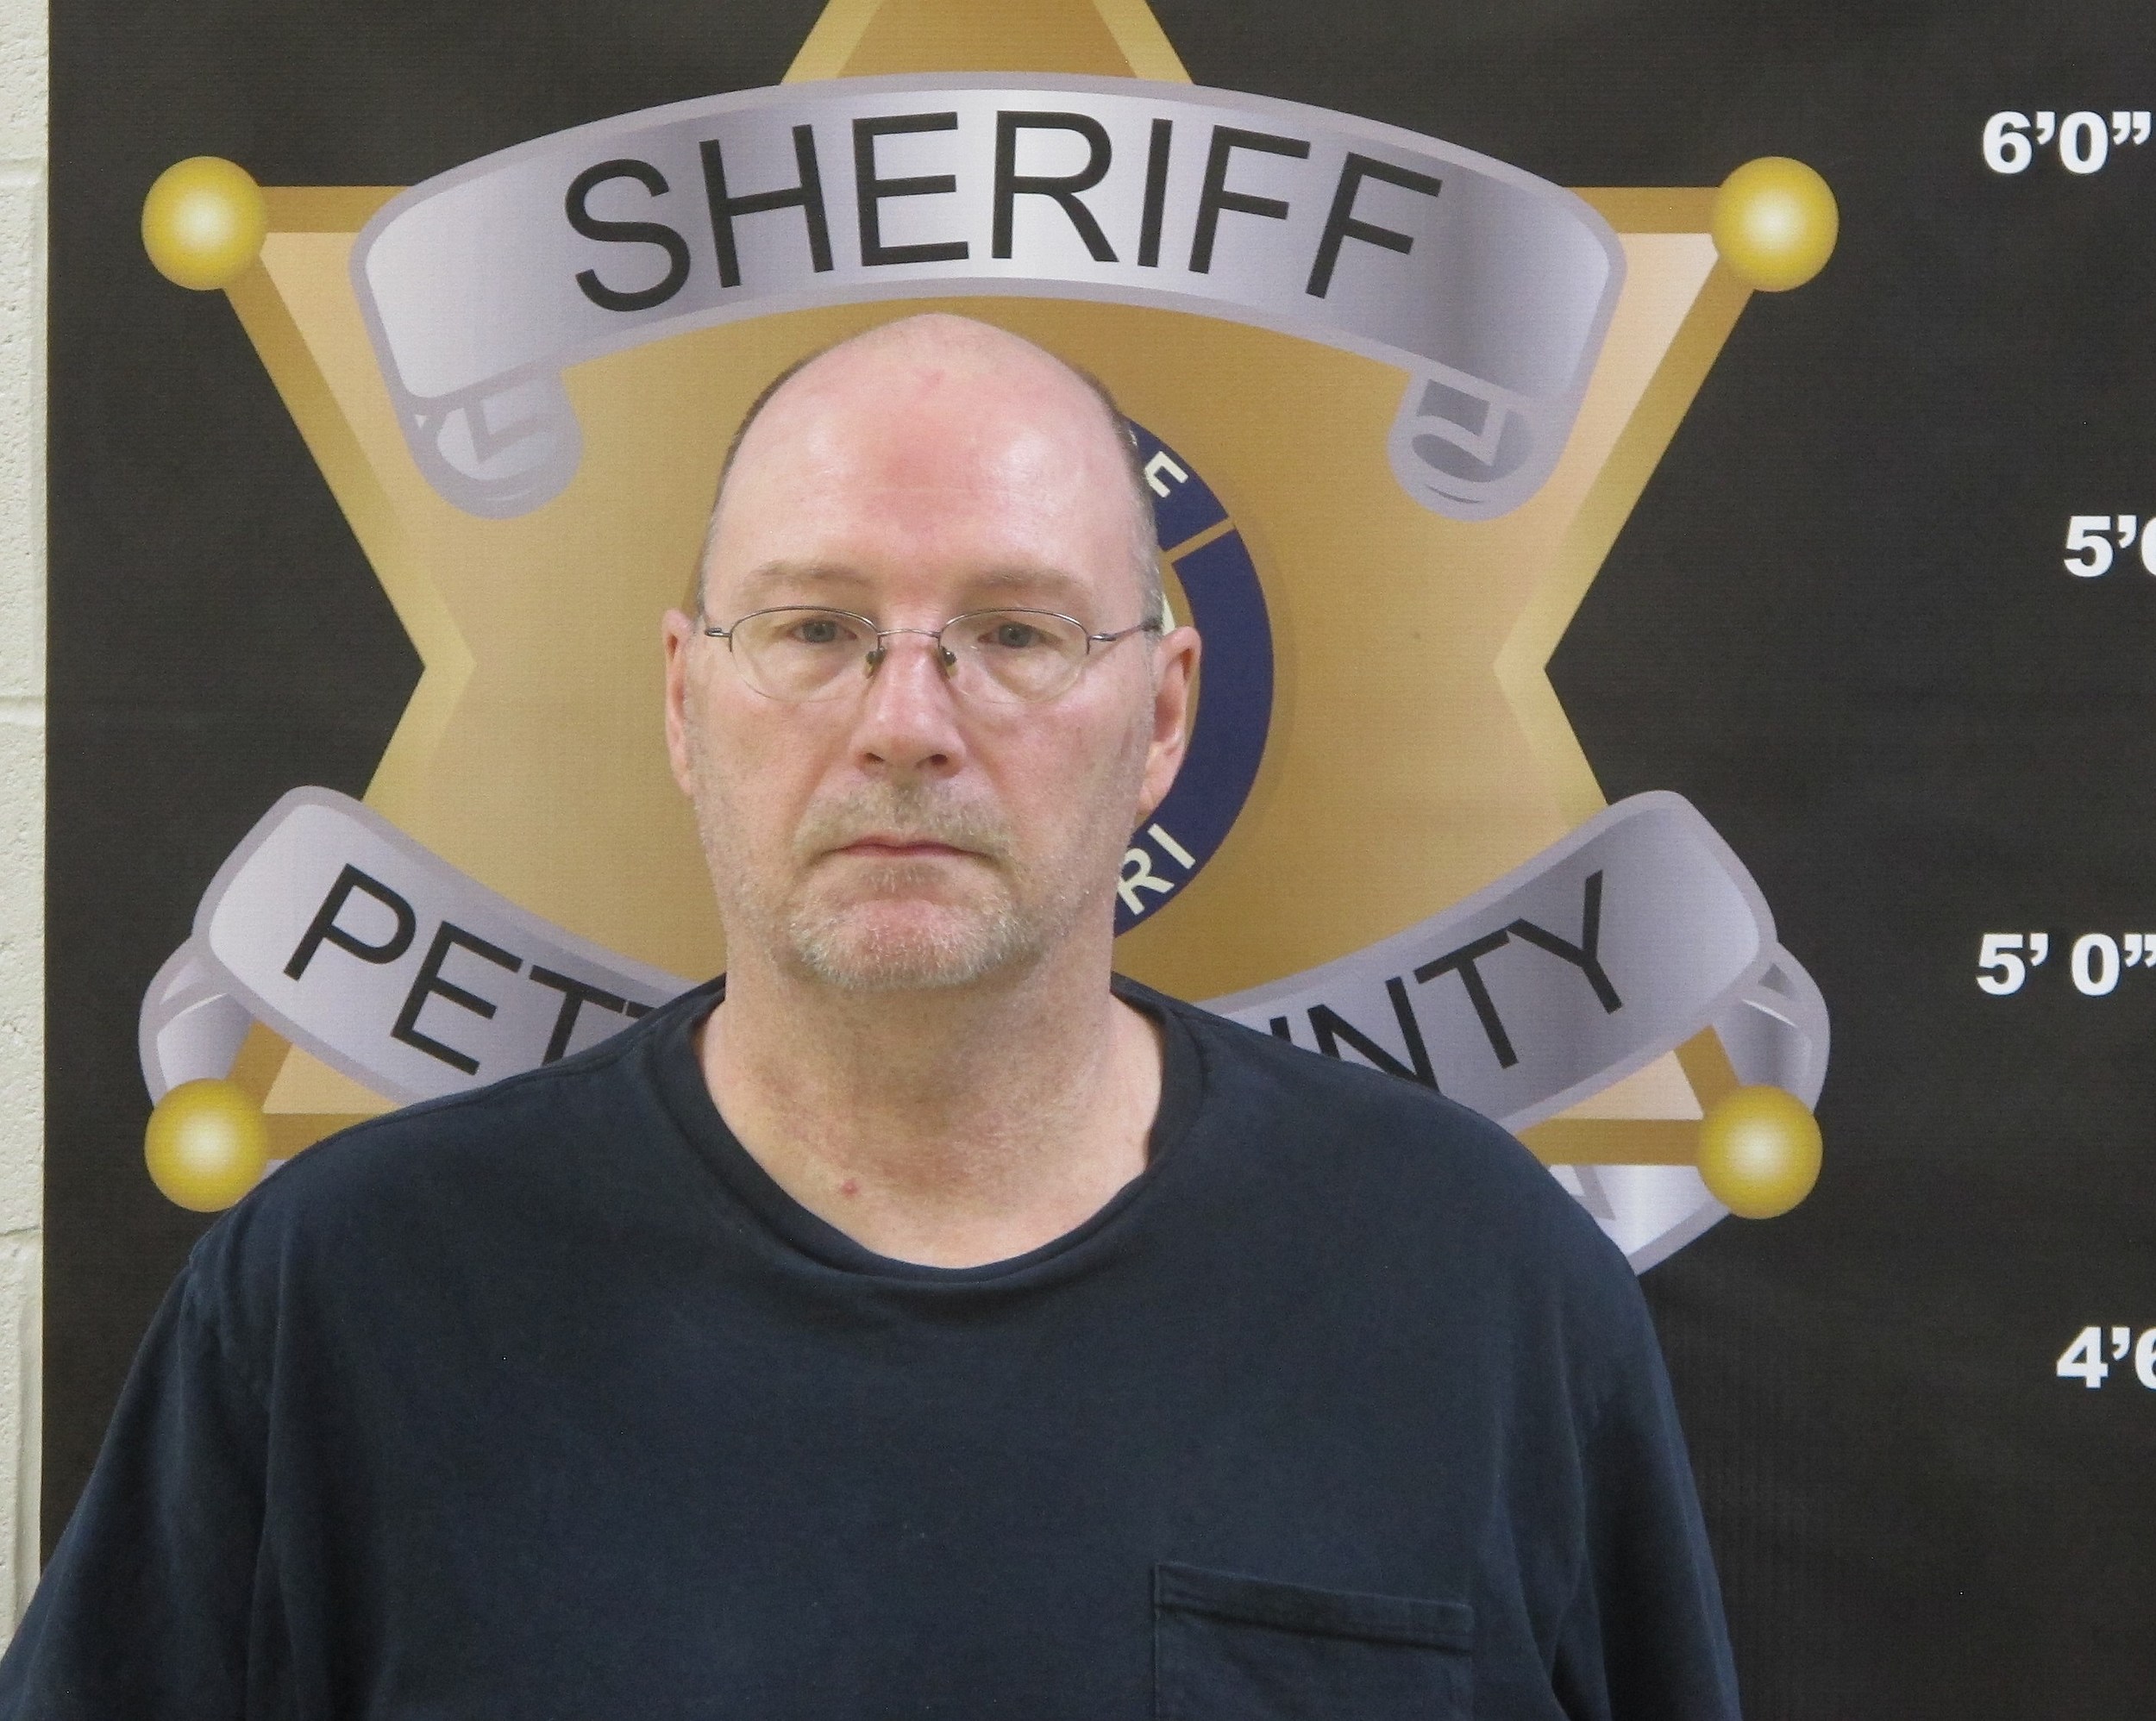 Sedalia Man Faces Charges of Sodomy, Incest & Sexual Misconduct